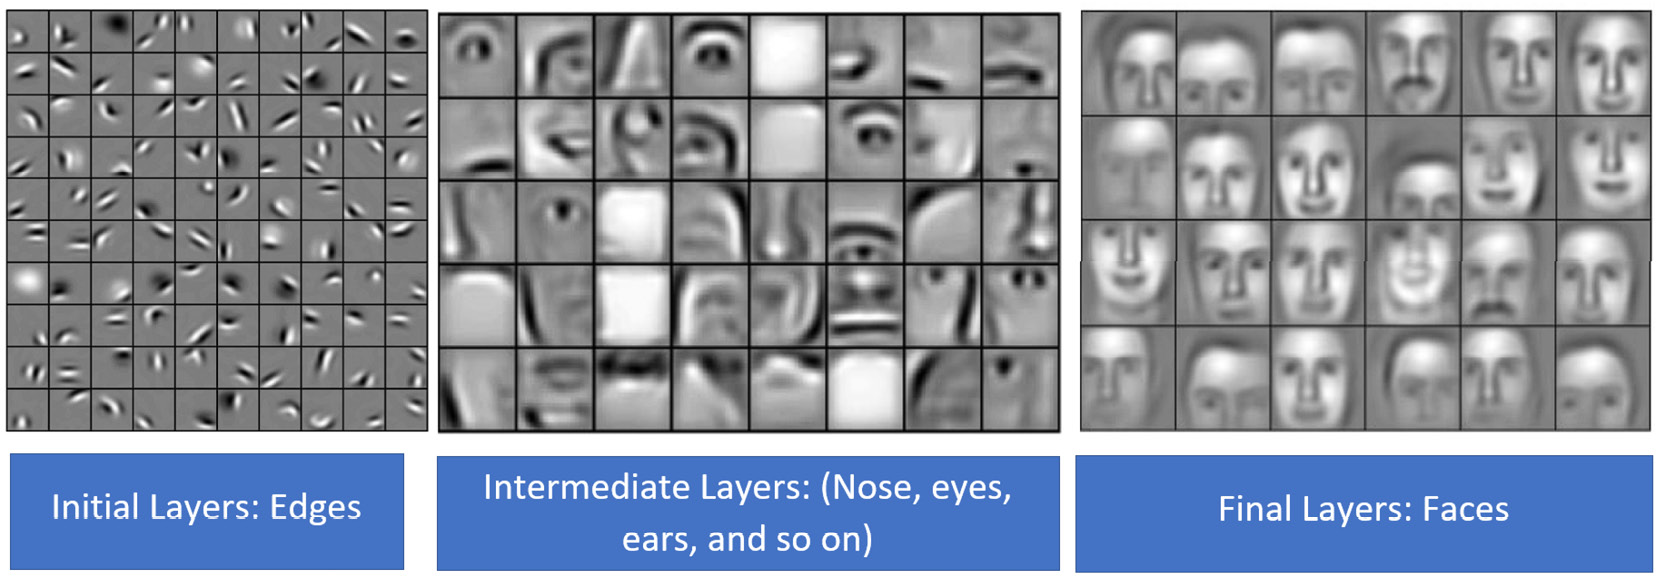 Figure 1.3: Deep learning model for detecting faces
